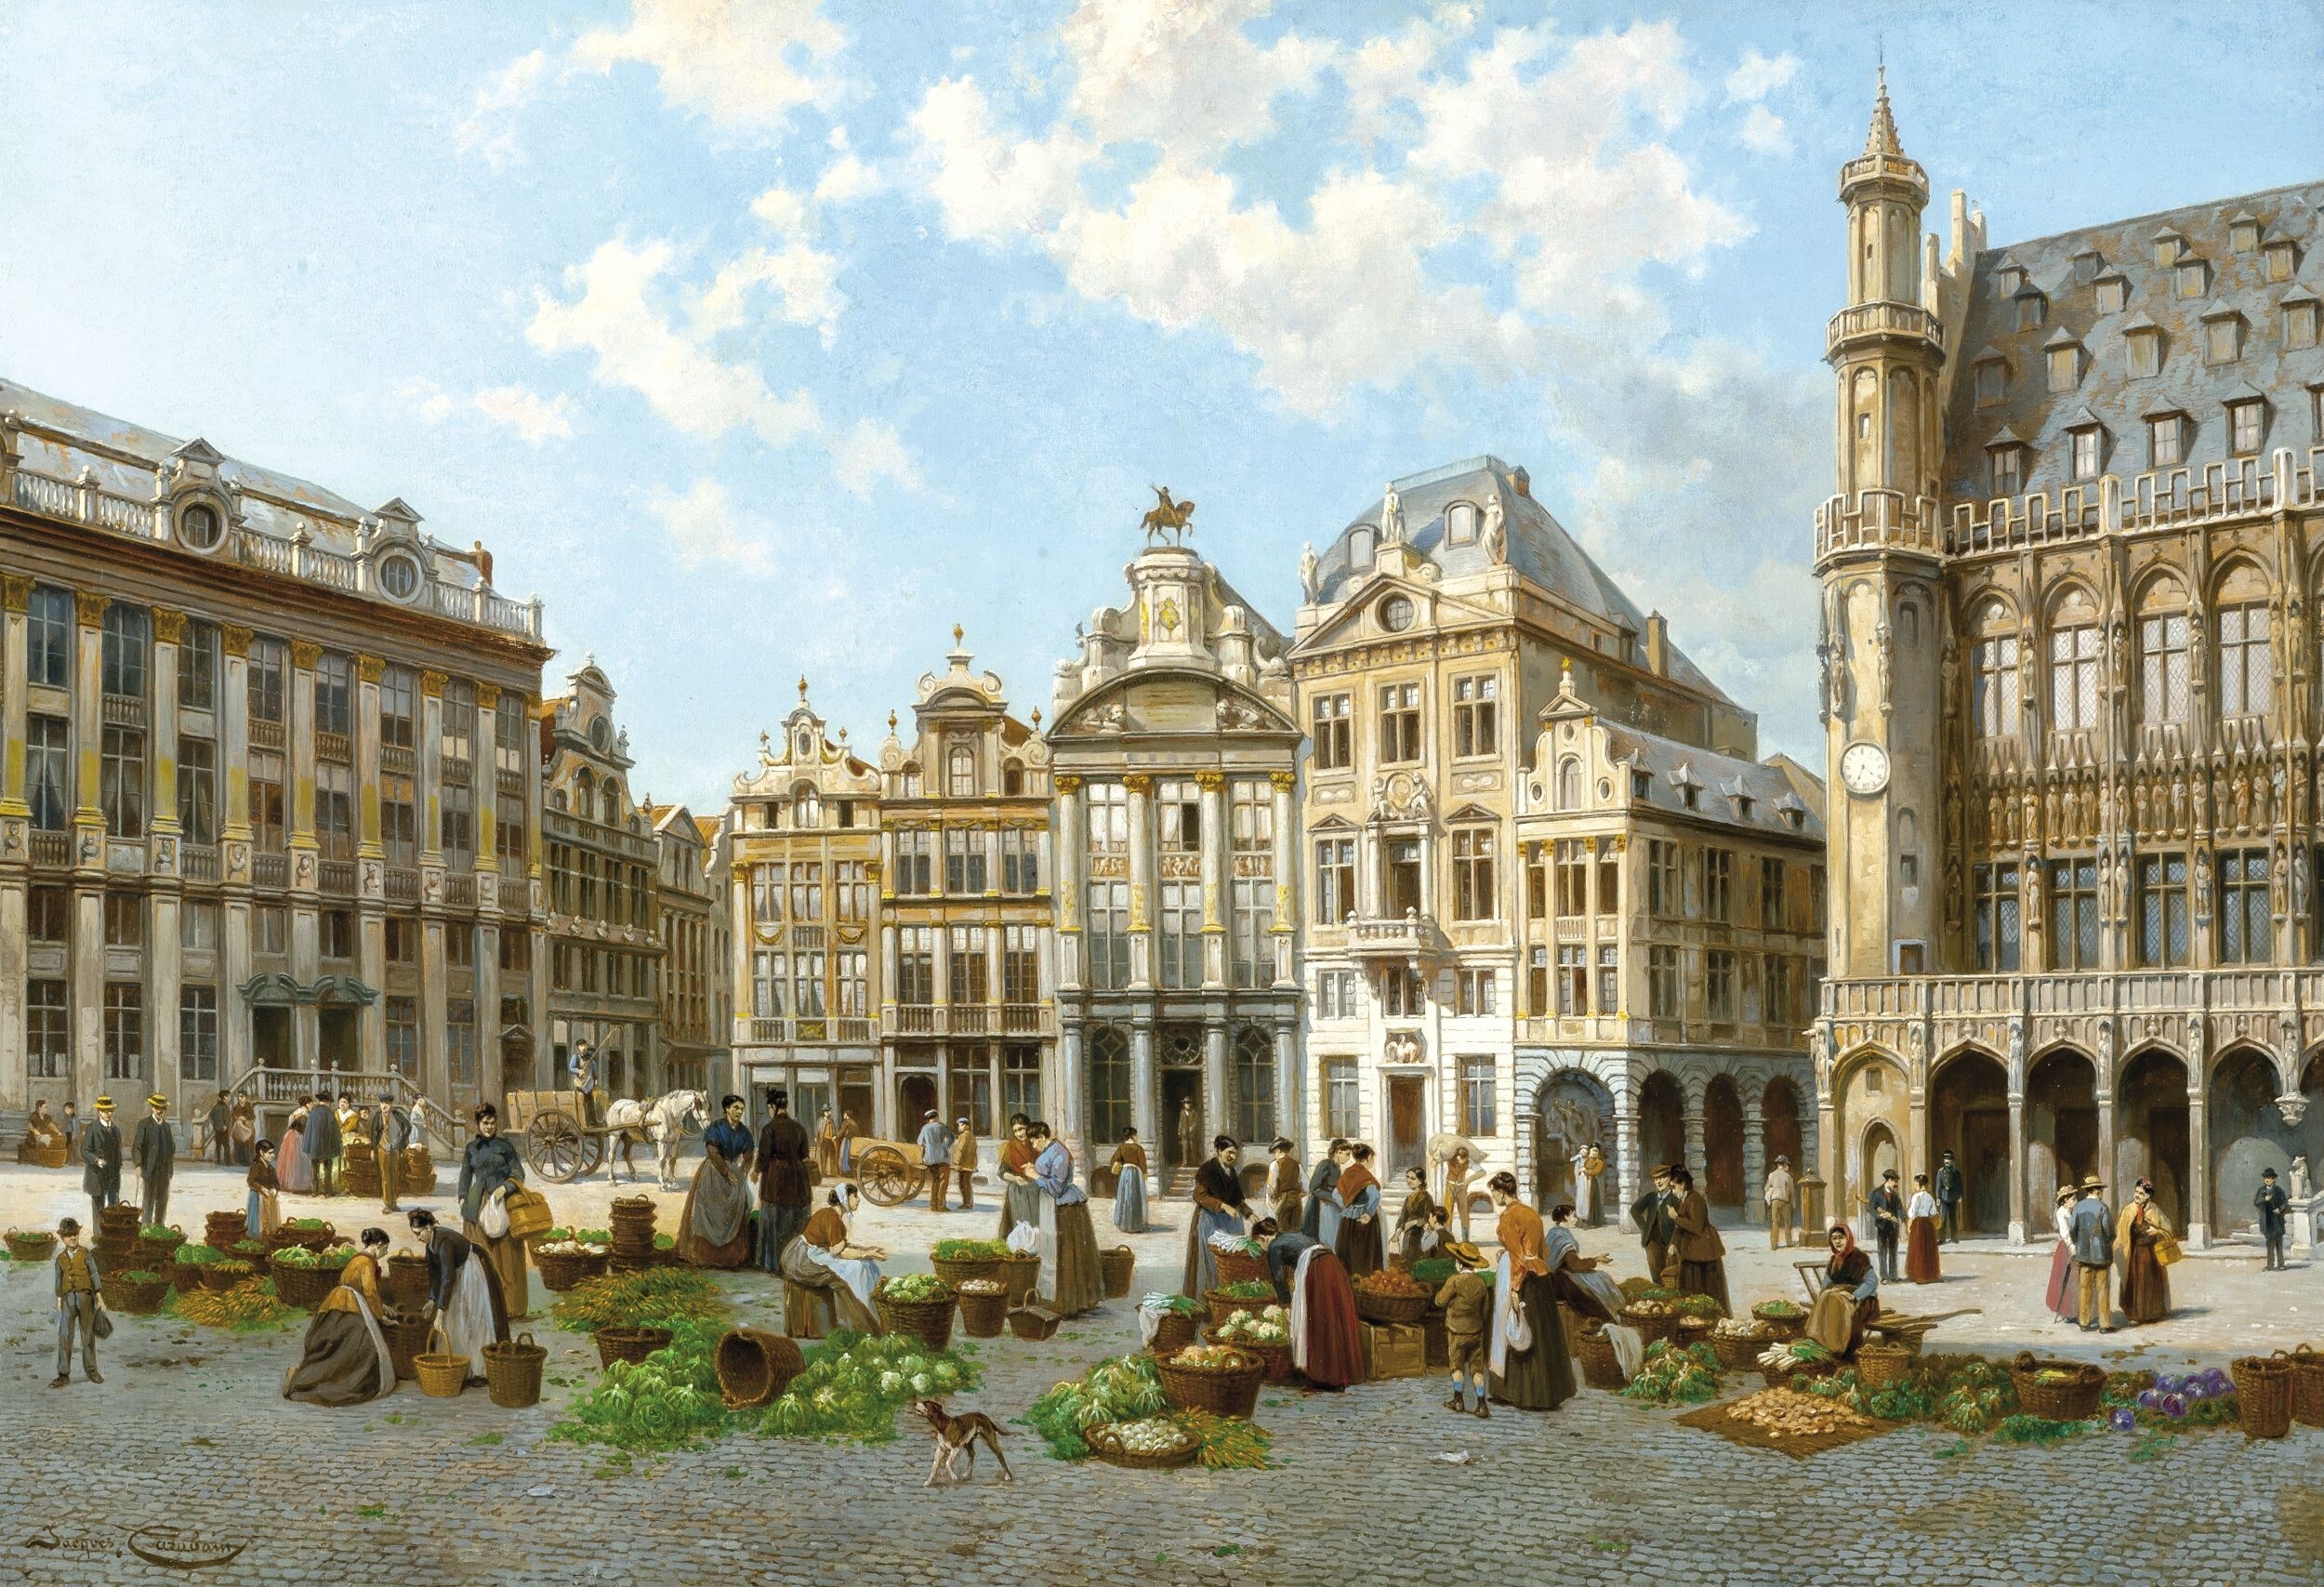 The Grand Place in Brussels by Jacques François Carabain